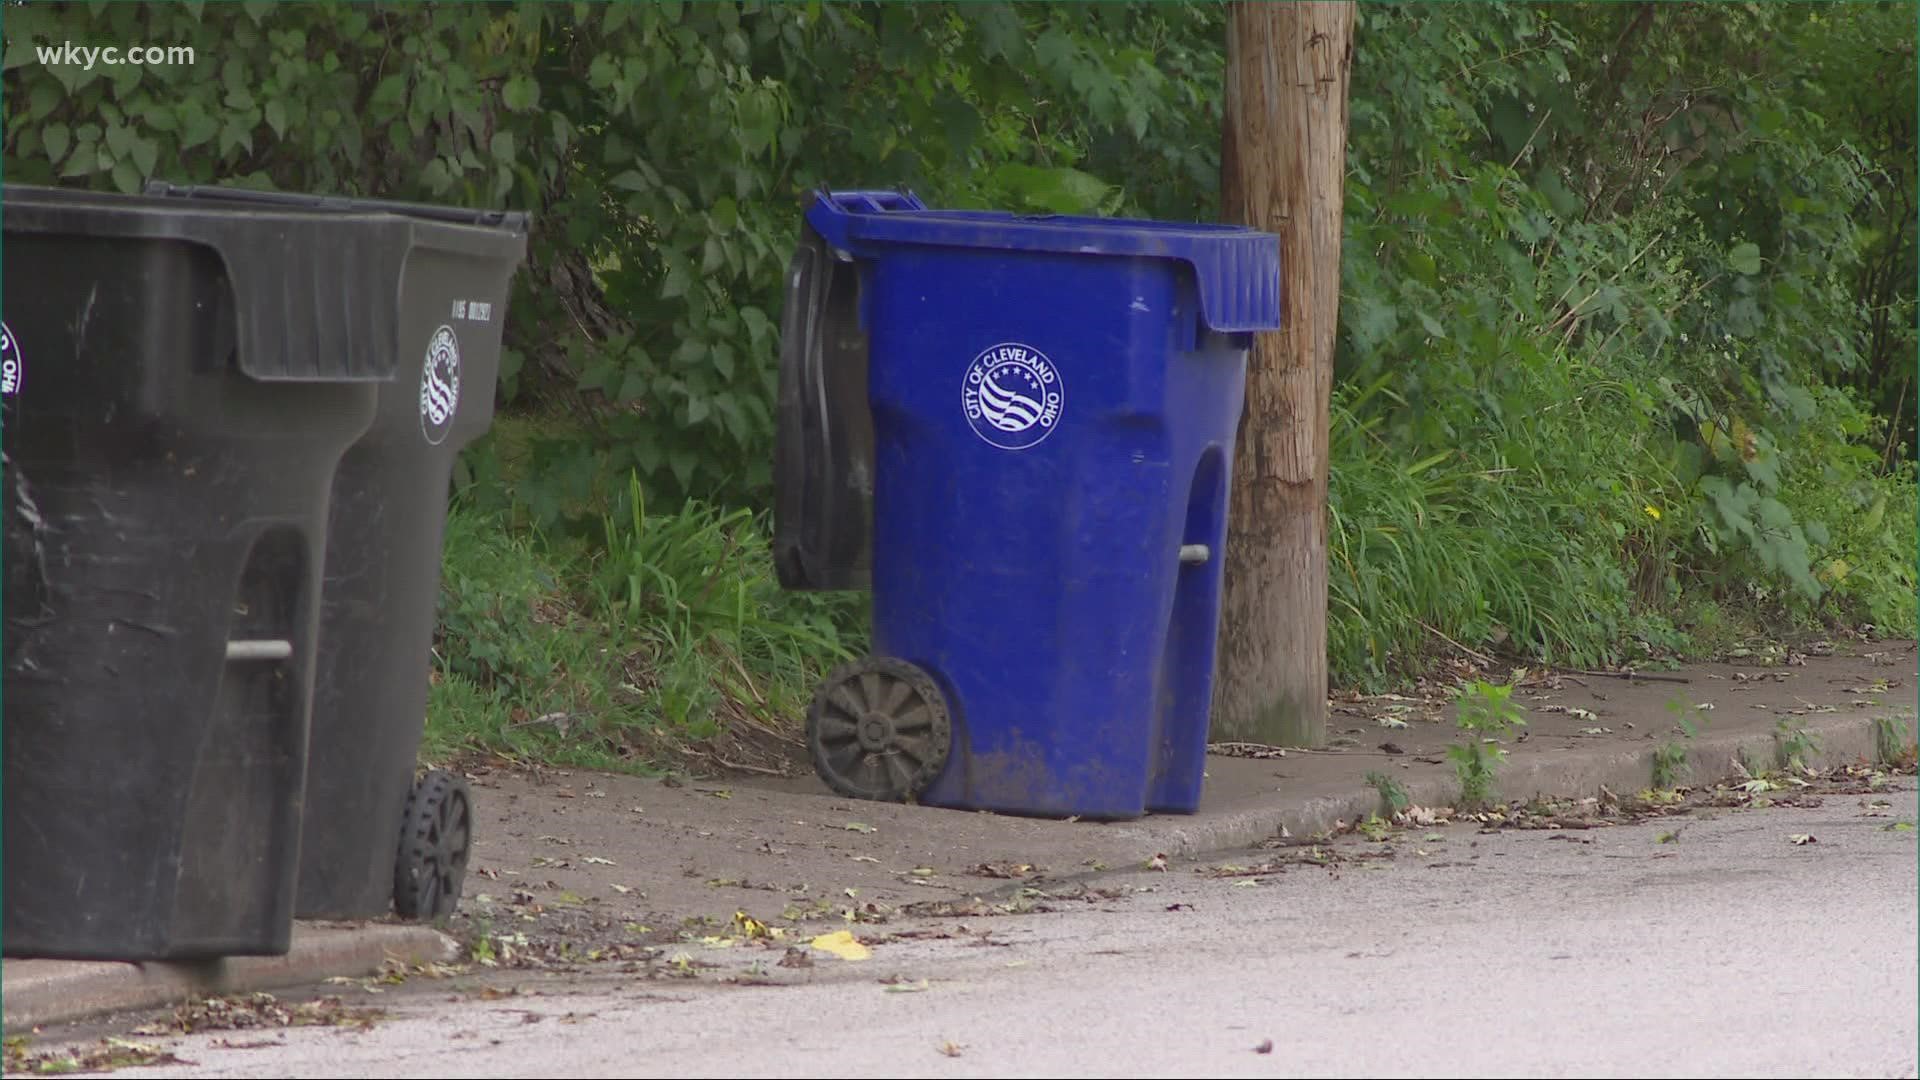 The new program is an effort to keep trash out of recycling by allowing residents serious about recycling to partake only, Mayor Frank G. Jackson says.